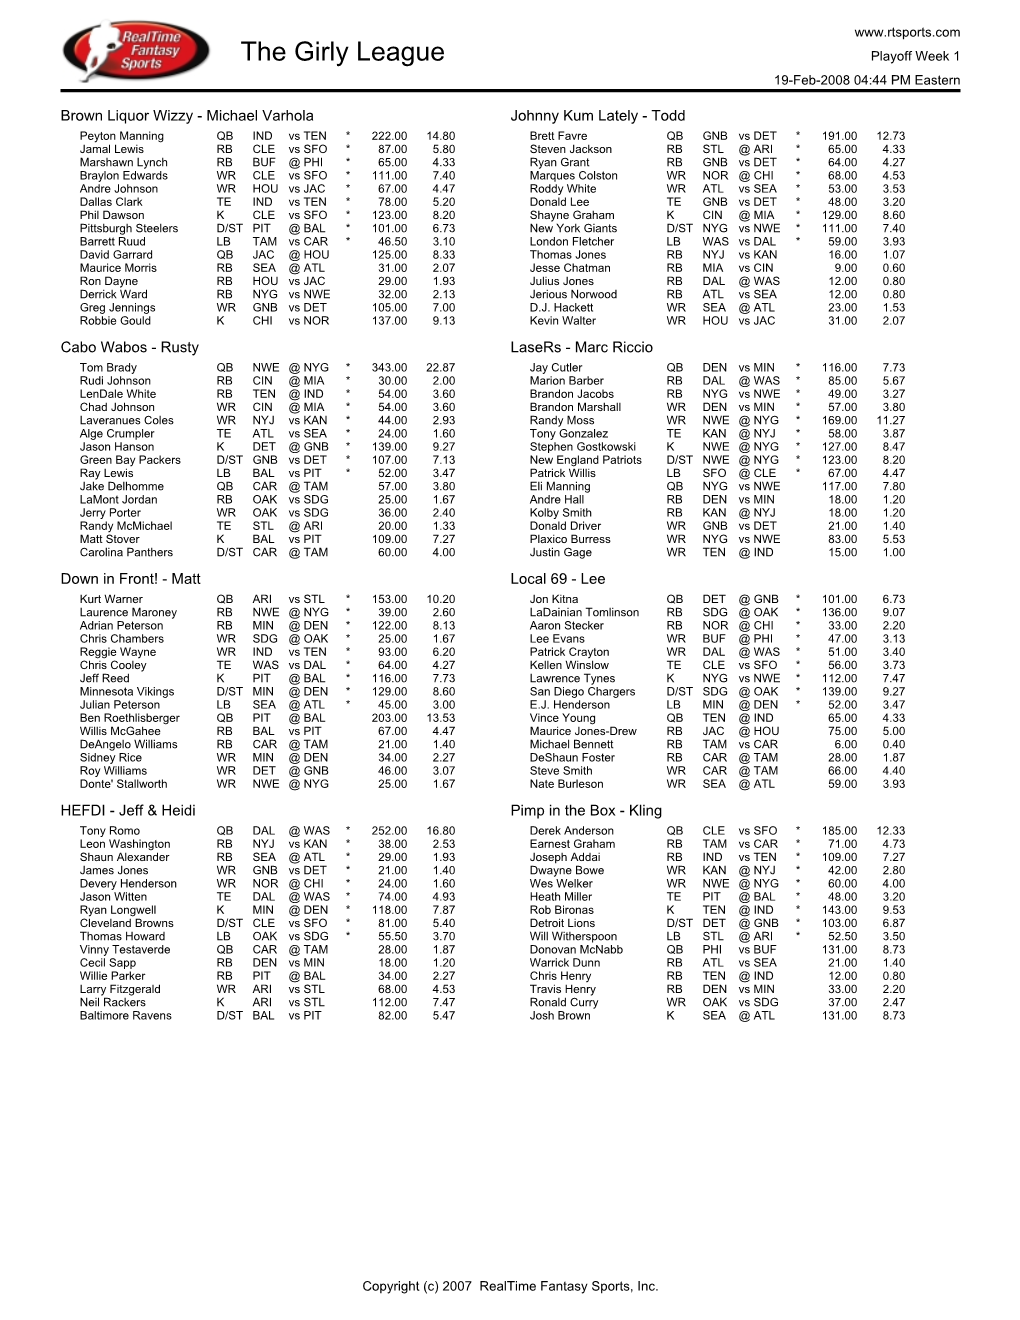 Final Rosters